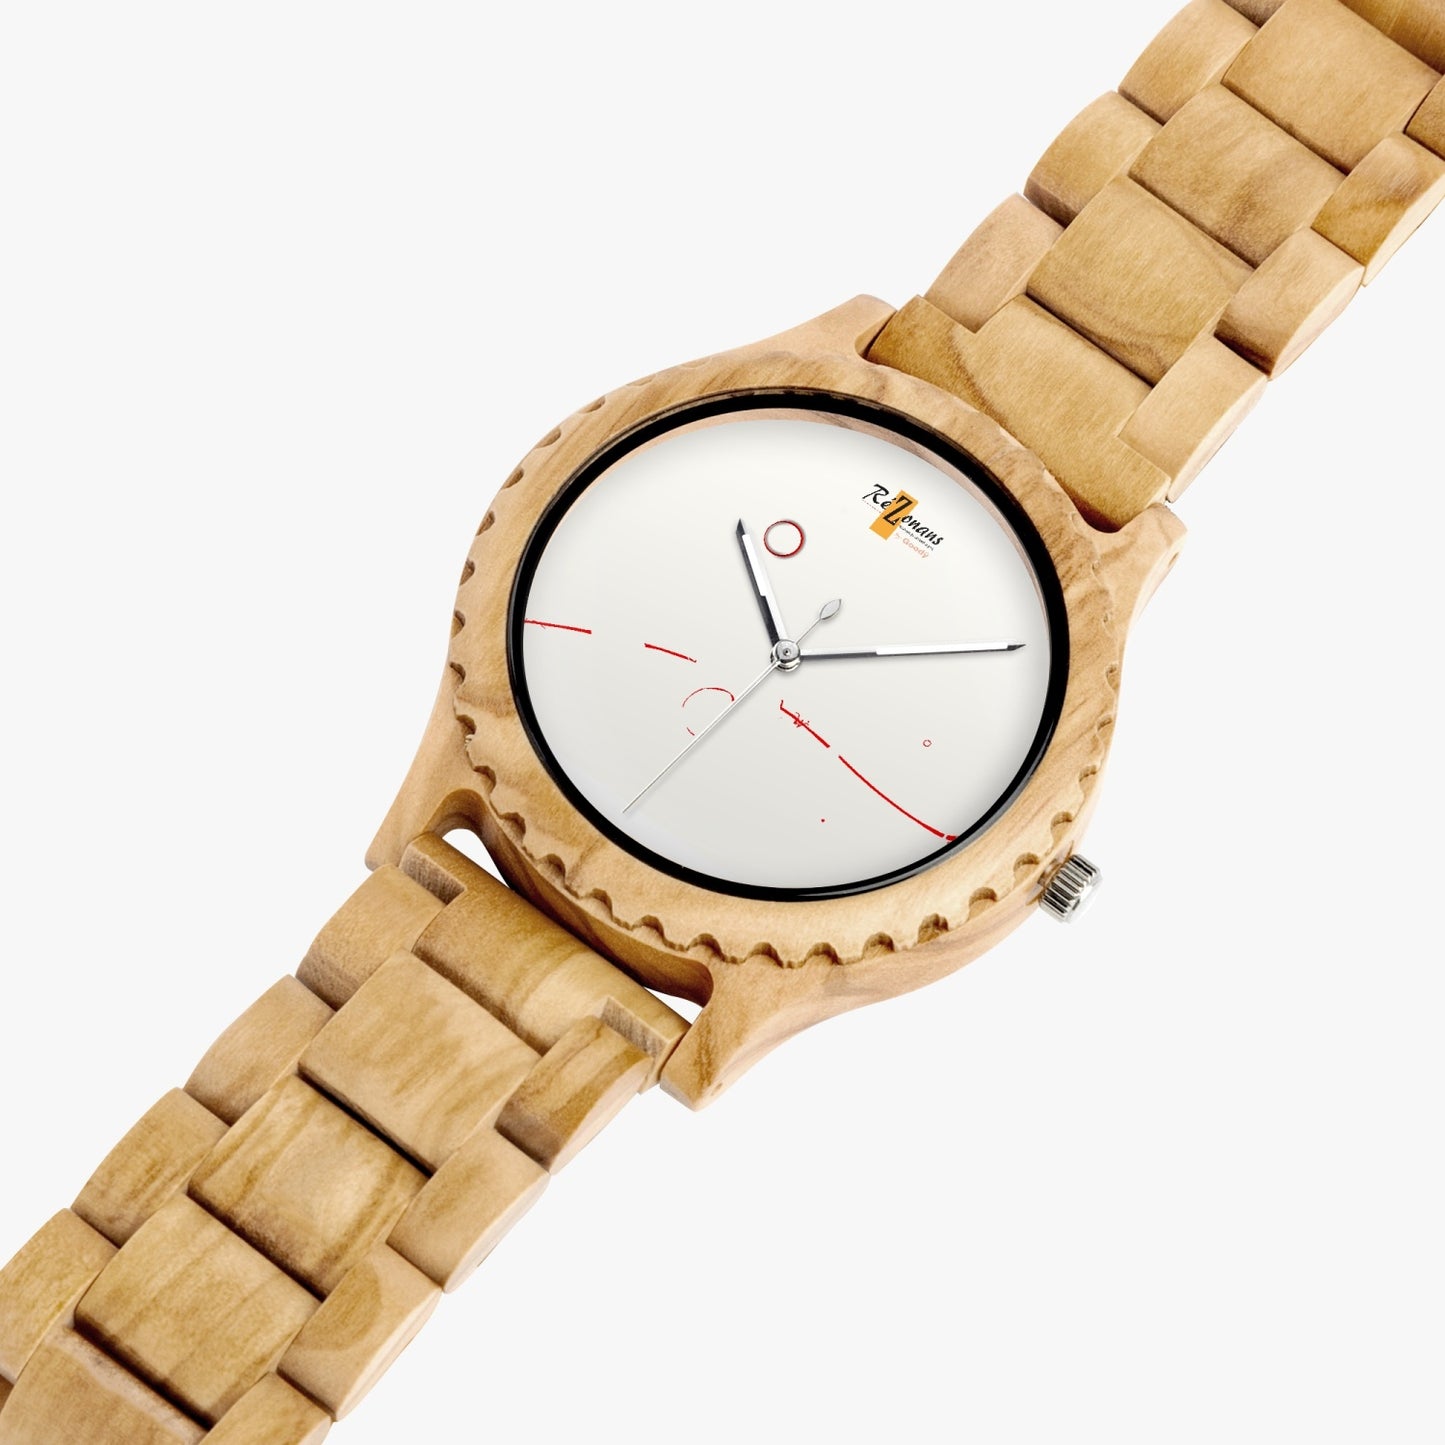 Natural wood watch "Lalignerouge"